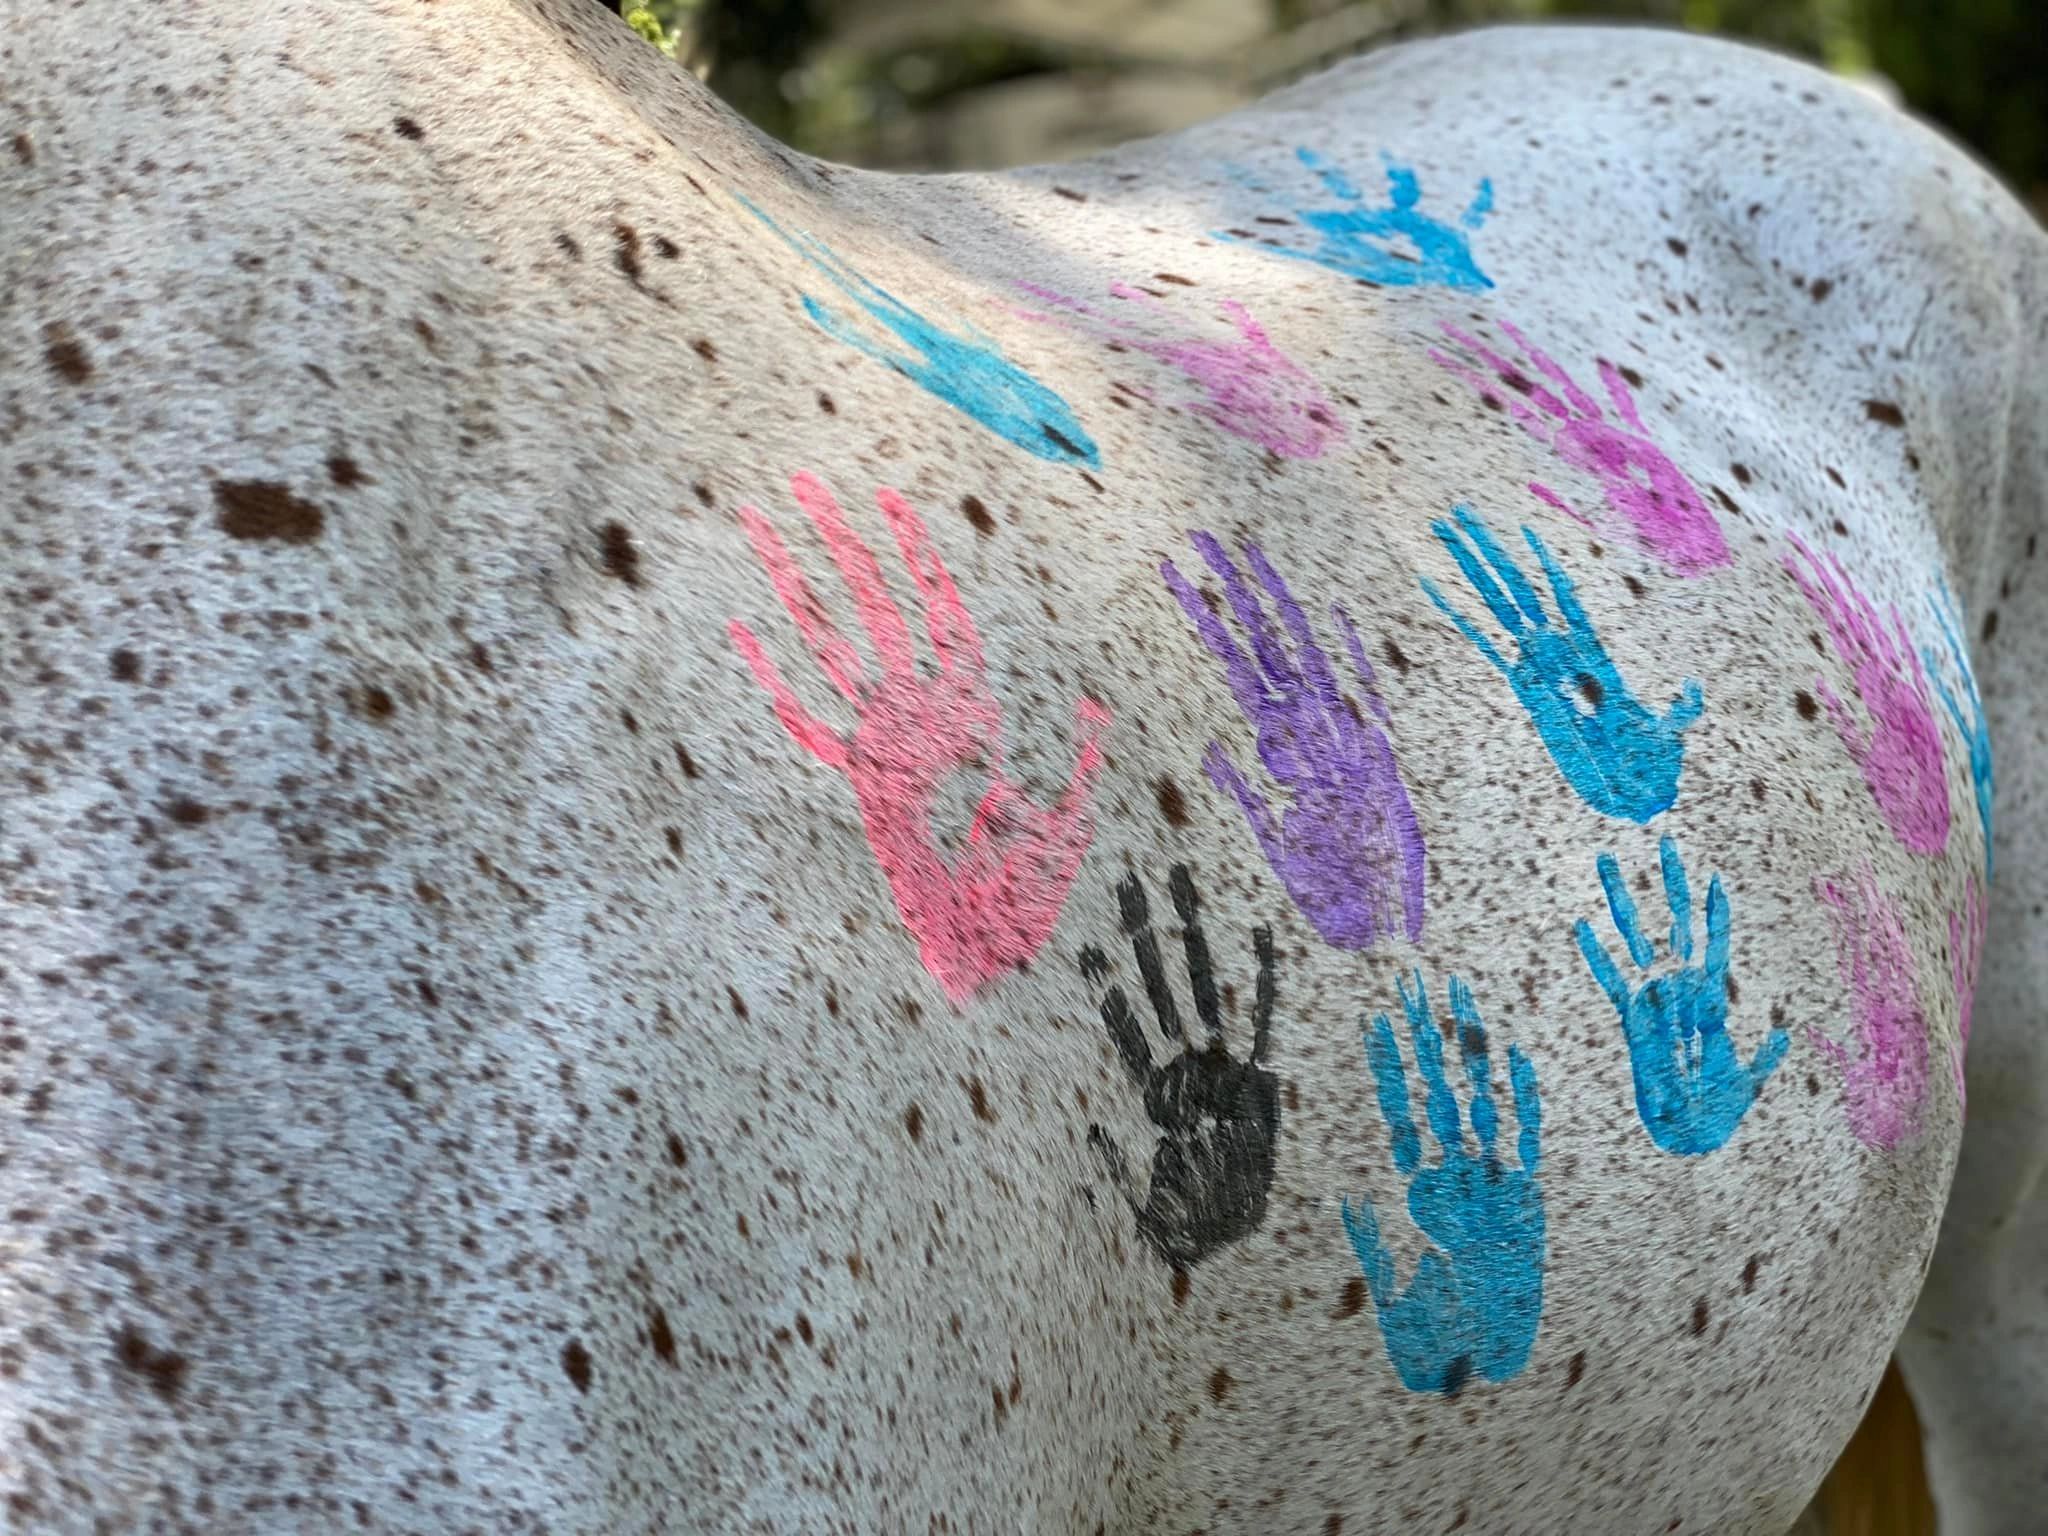 Therapeutic painted hand prints on the side of a horse!